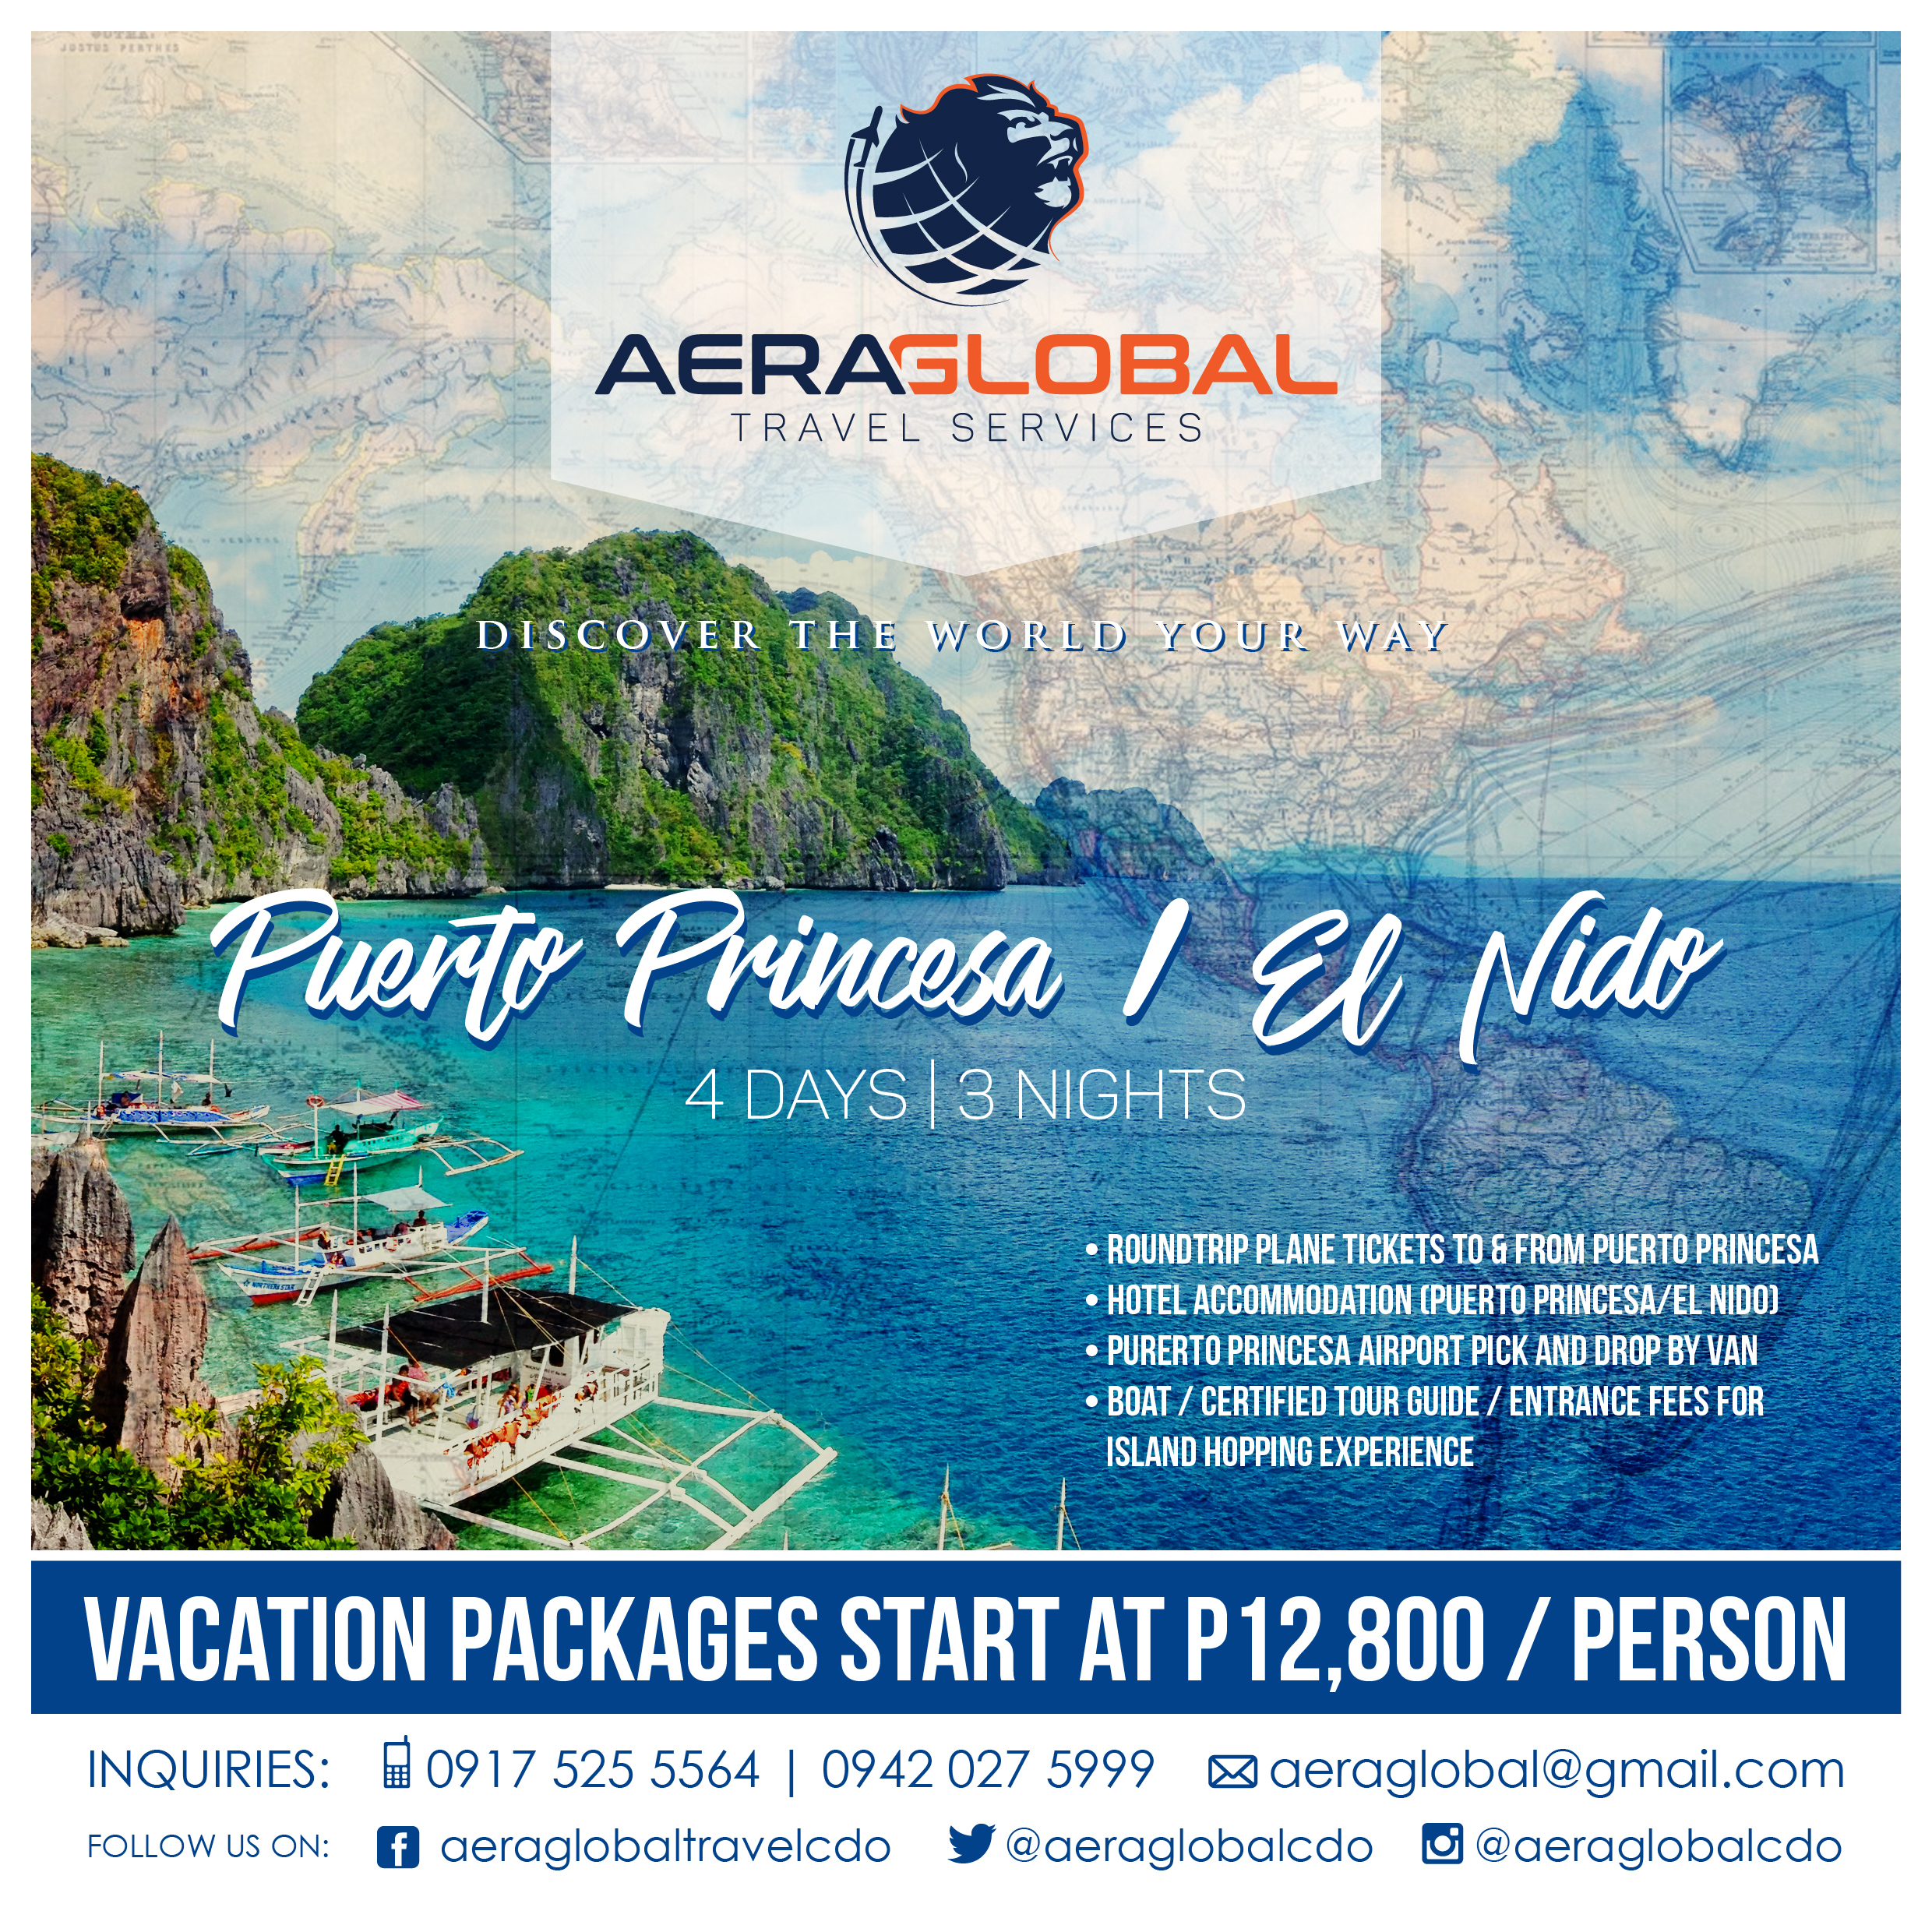 Aera Global Travel Services' Palawan Package